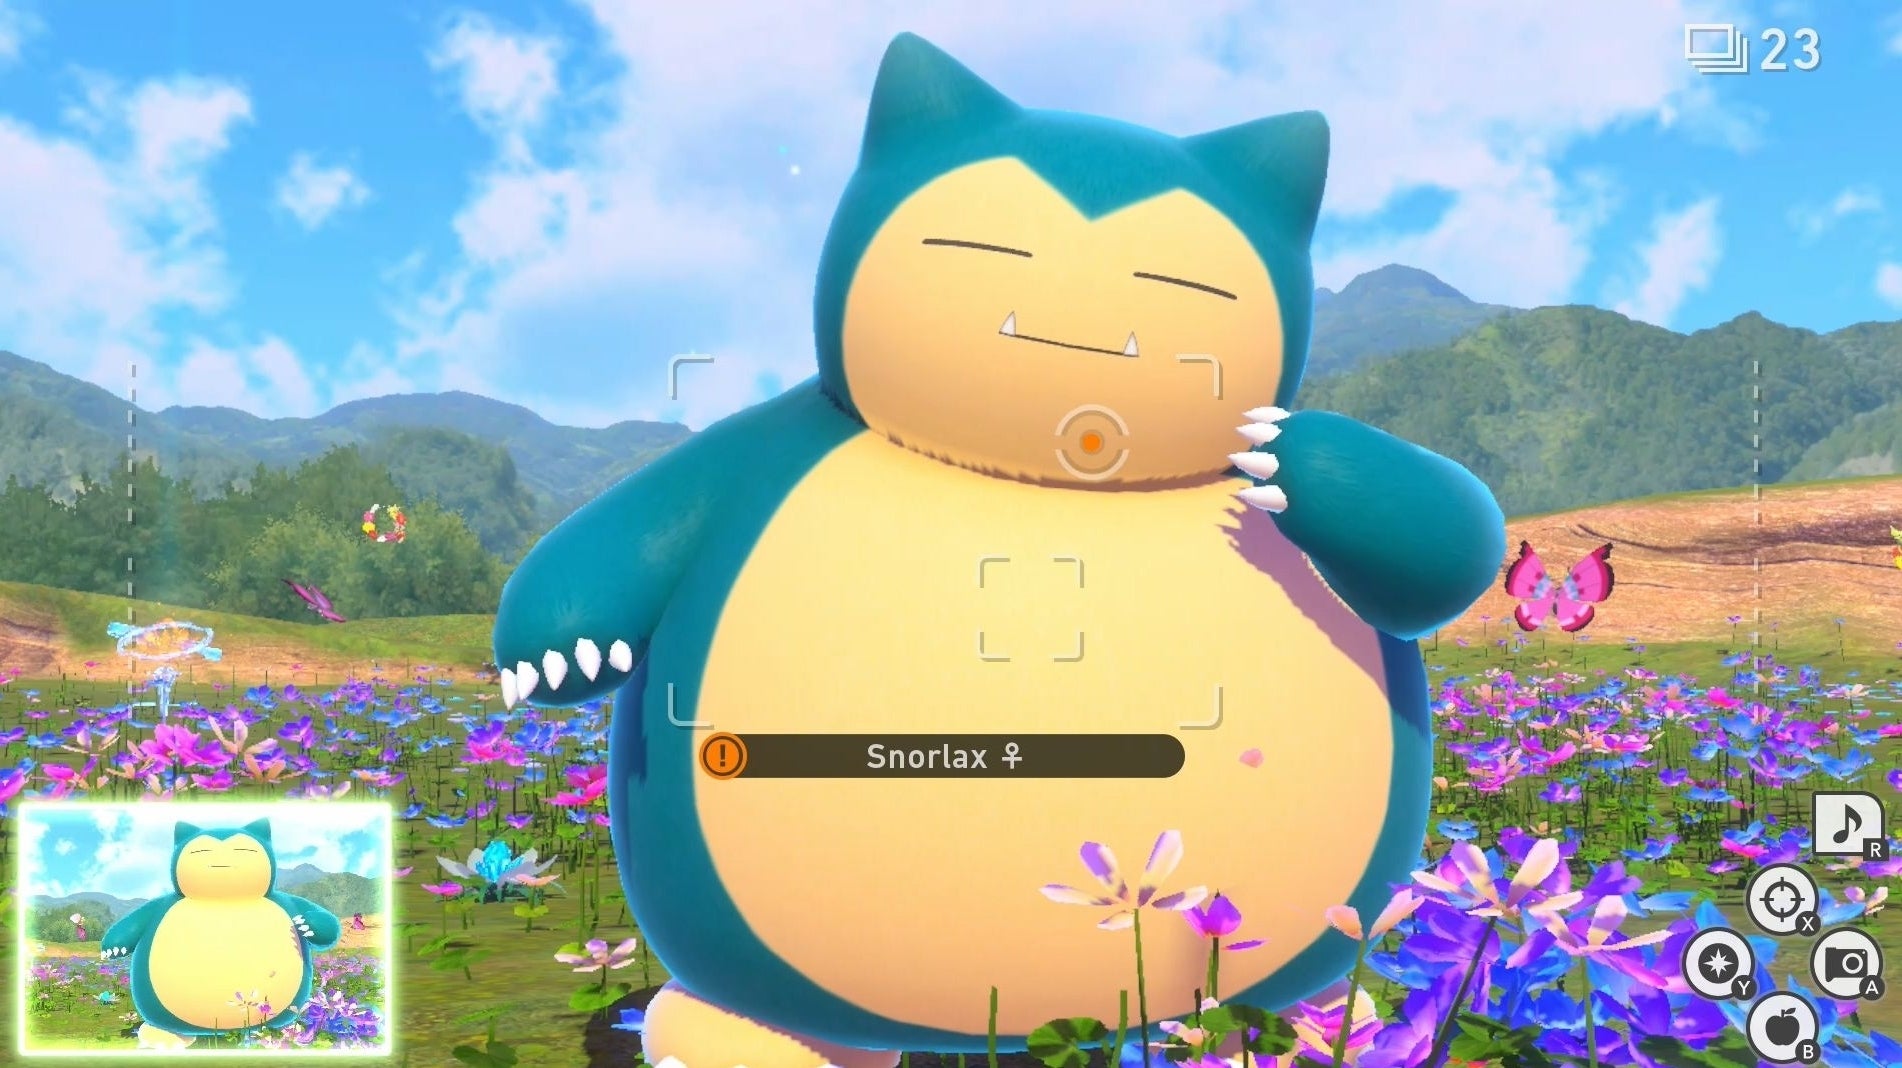 Image for New Pokémon Snap - Snorlax's location: How to take a four star Snorlax photo and complete the Snorlax Dash request explained